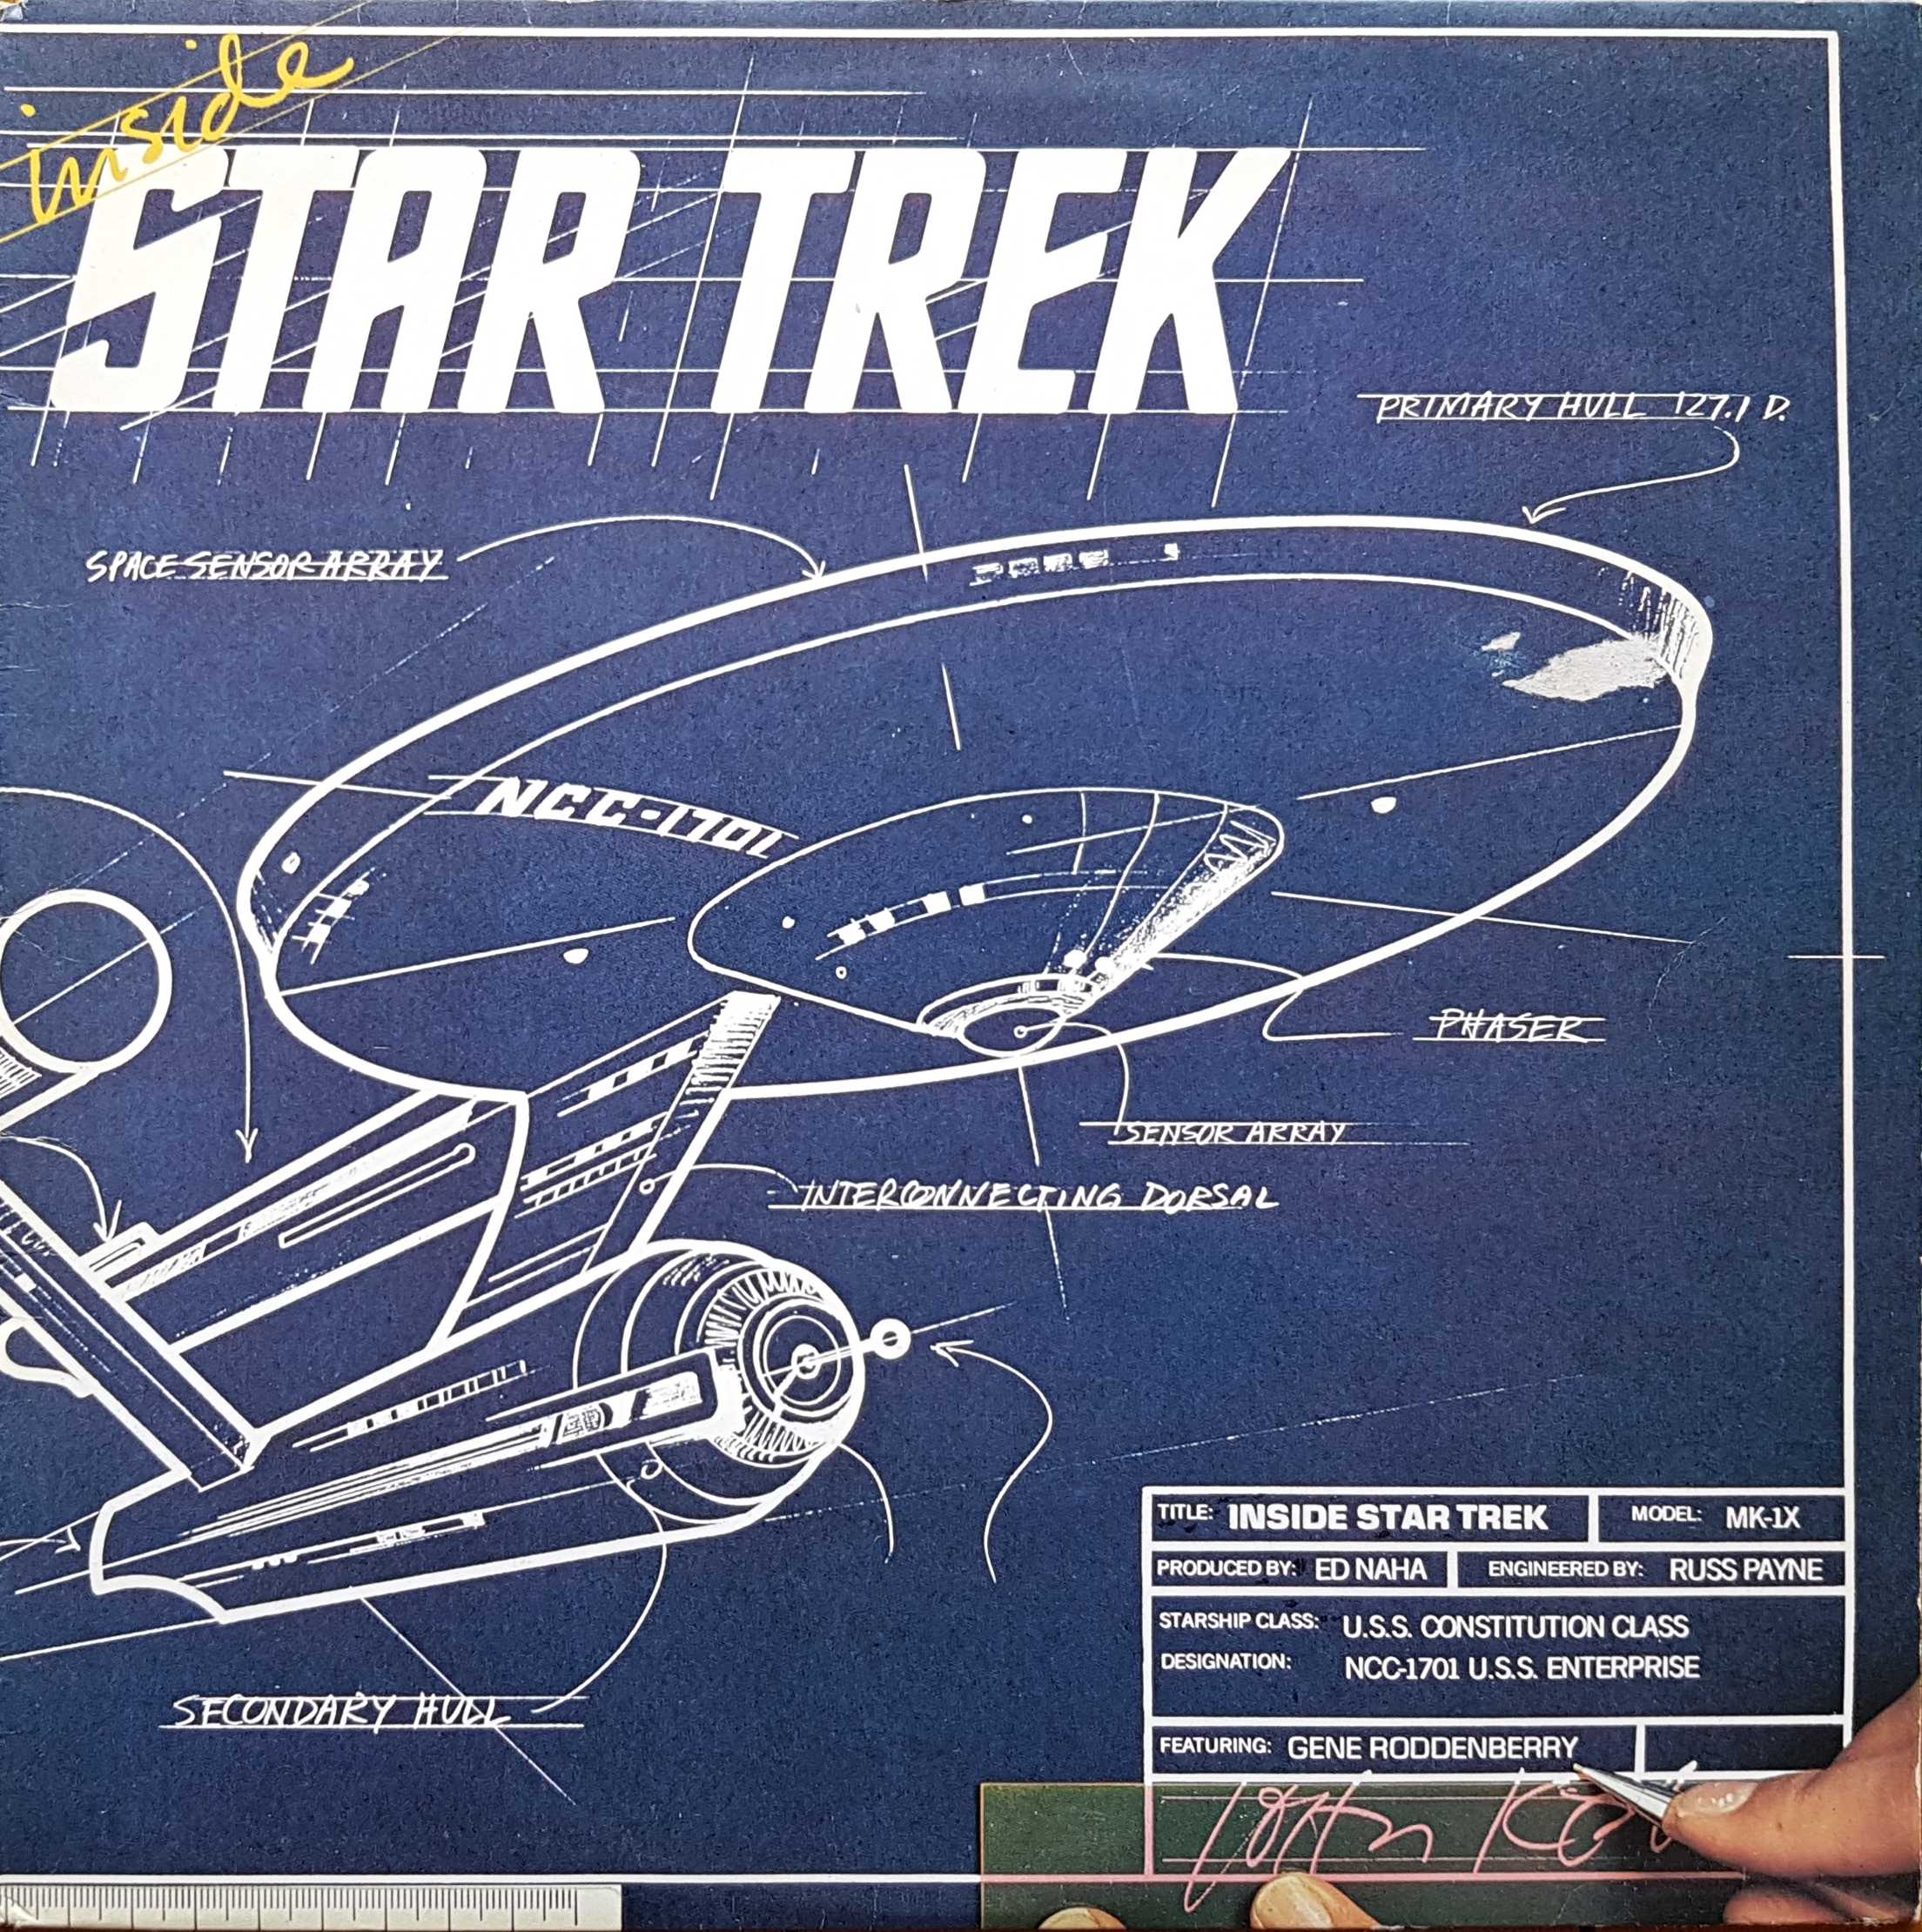 Picture of S 81610 Inside star trek by artist Various from the BBC albums - Records and Tapes library